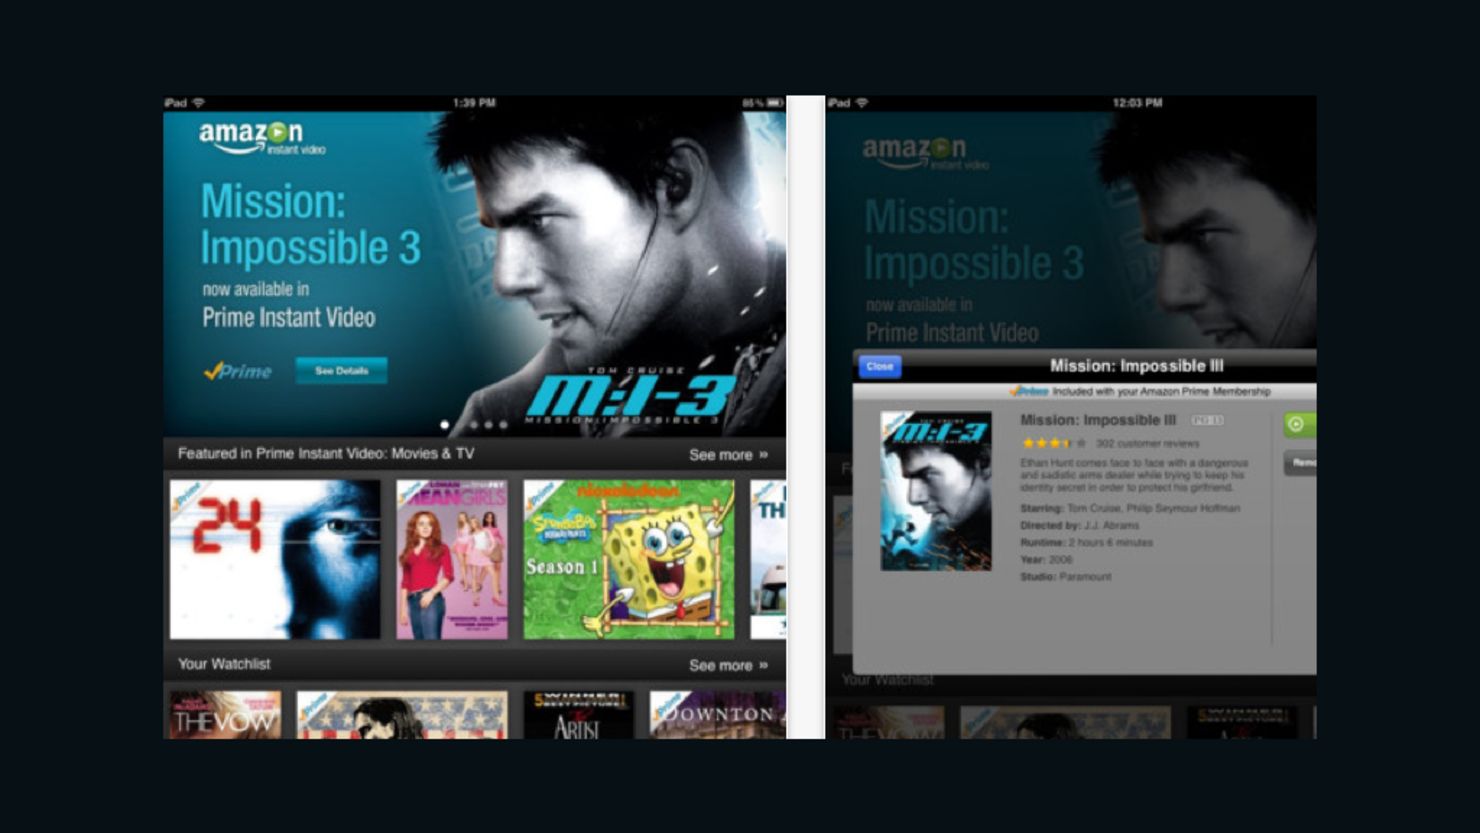 Amazon's instant video app for the iPad hit the App Store Wednesday morning.